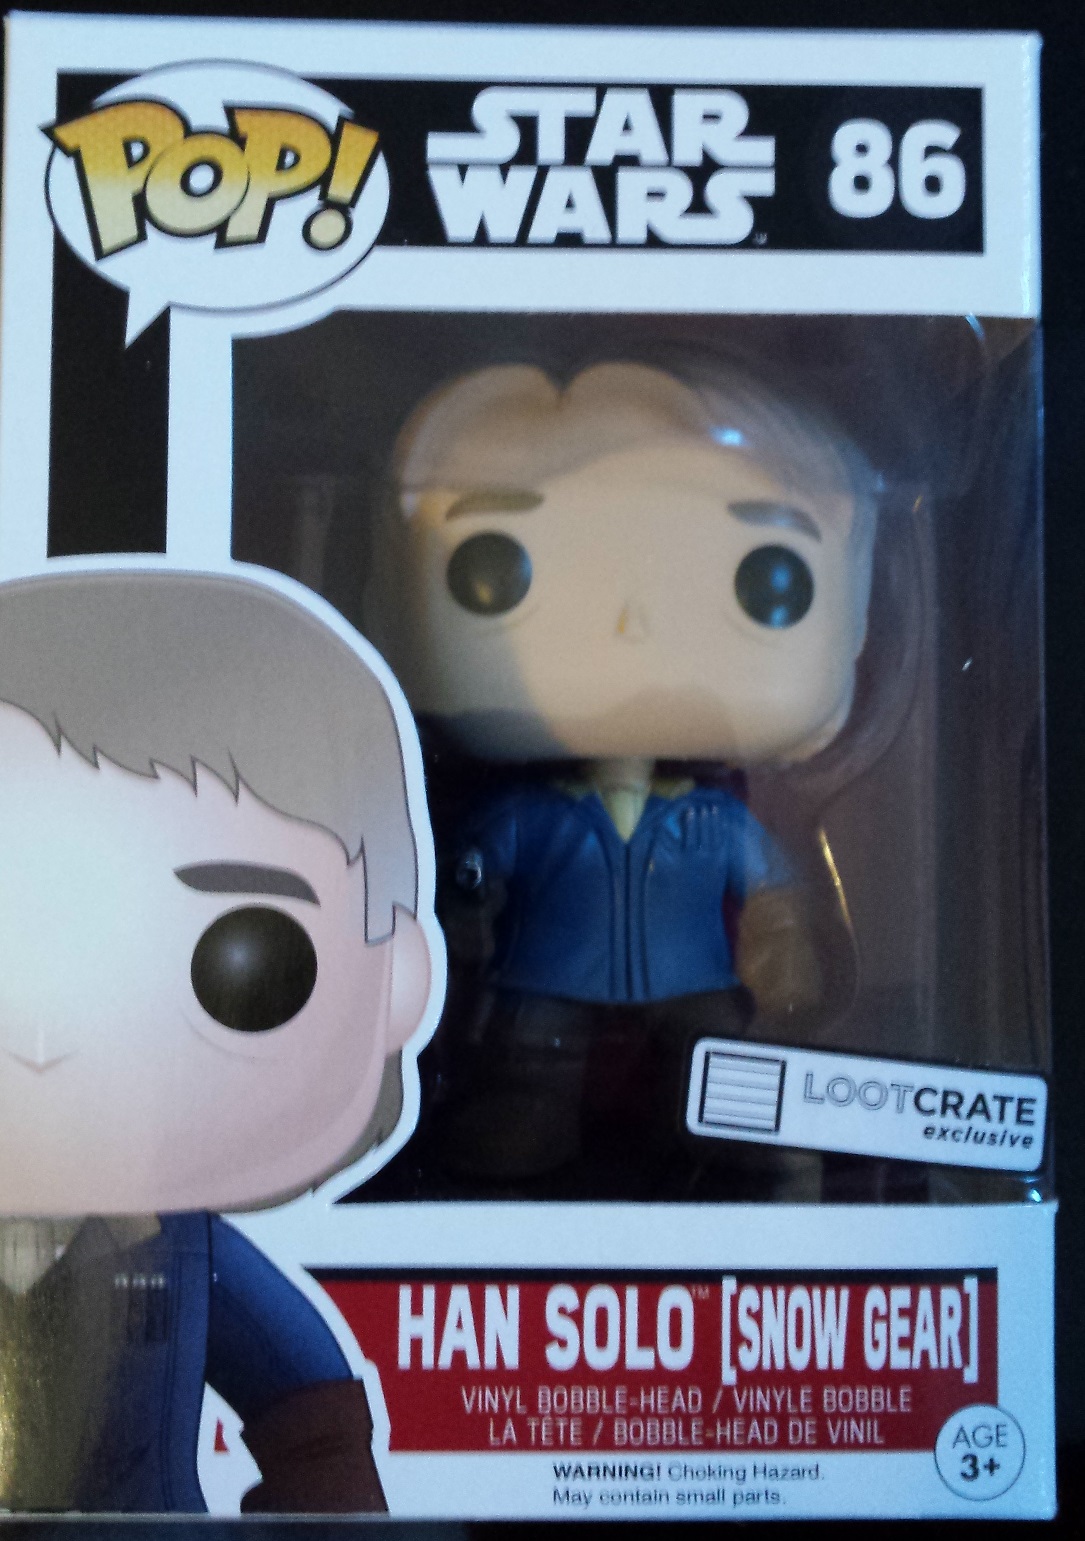 Han solo, pop! , star wars, loot crate, loot crate review, december loot crate, discovery loot crate